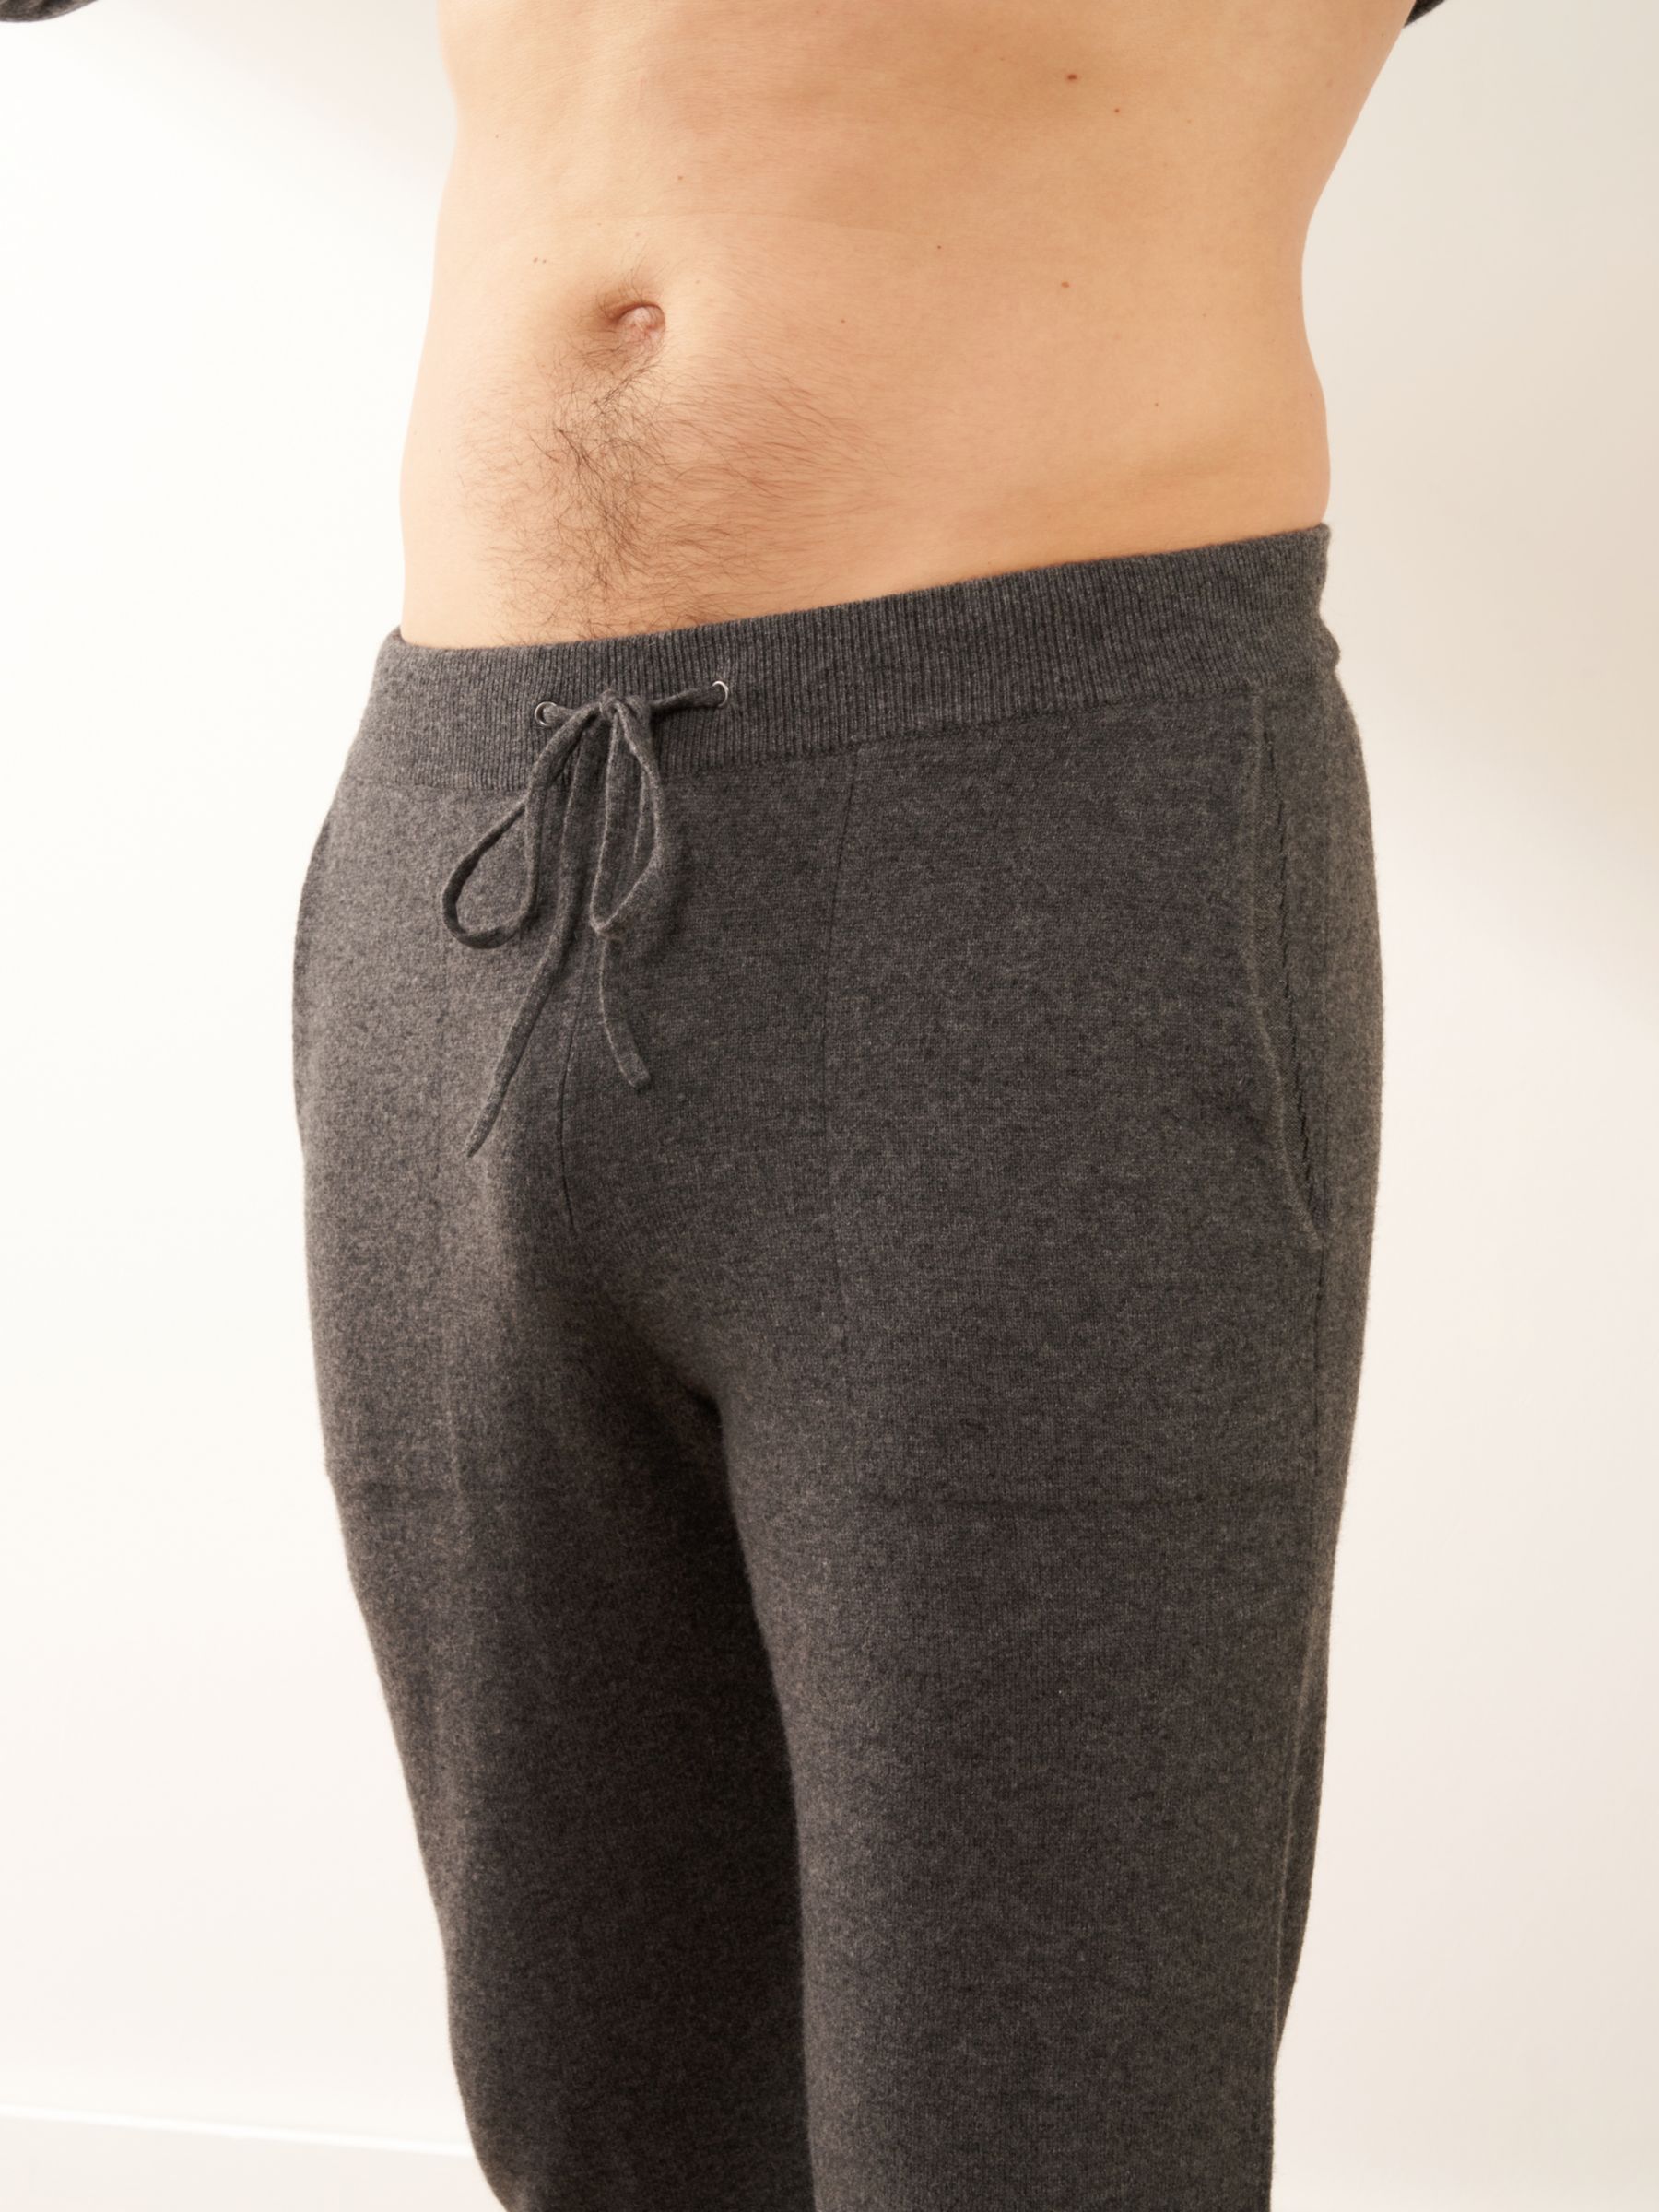 Buy Truly Cashmere Joggers, Charcoal Marl Online at johnlewis.com